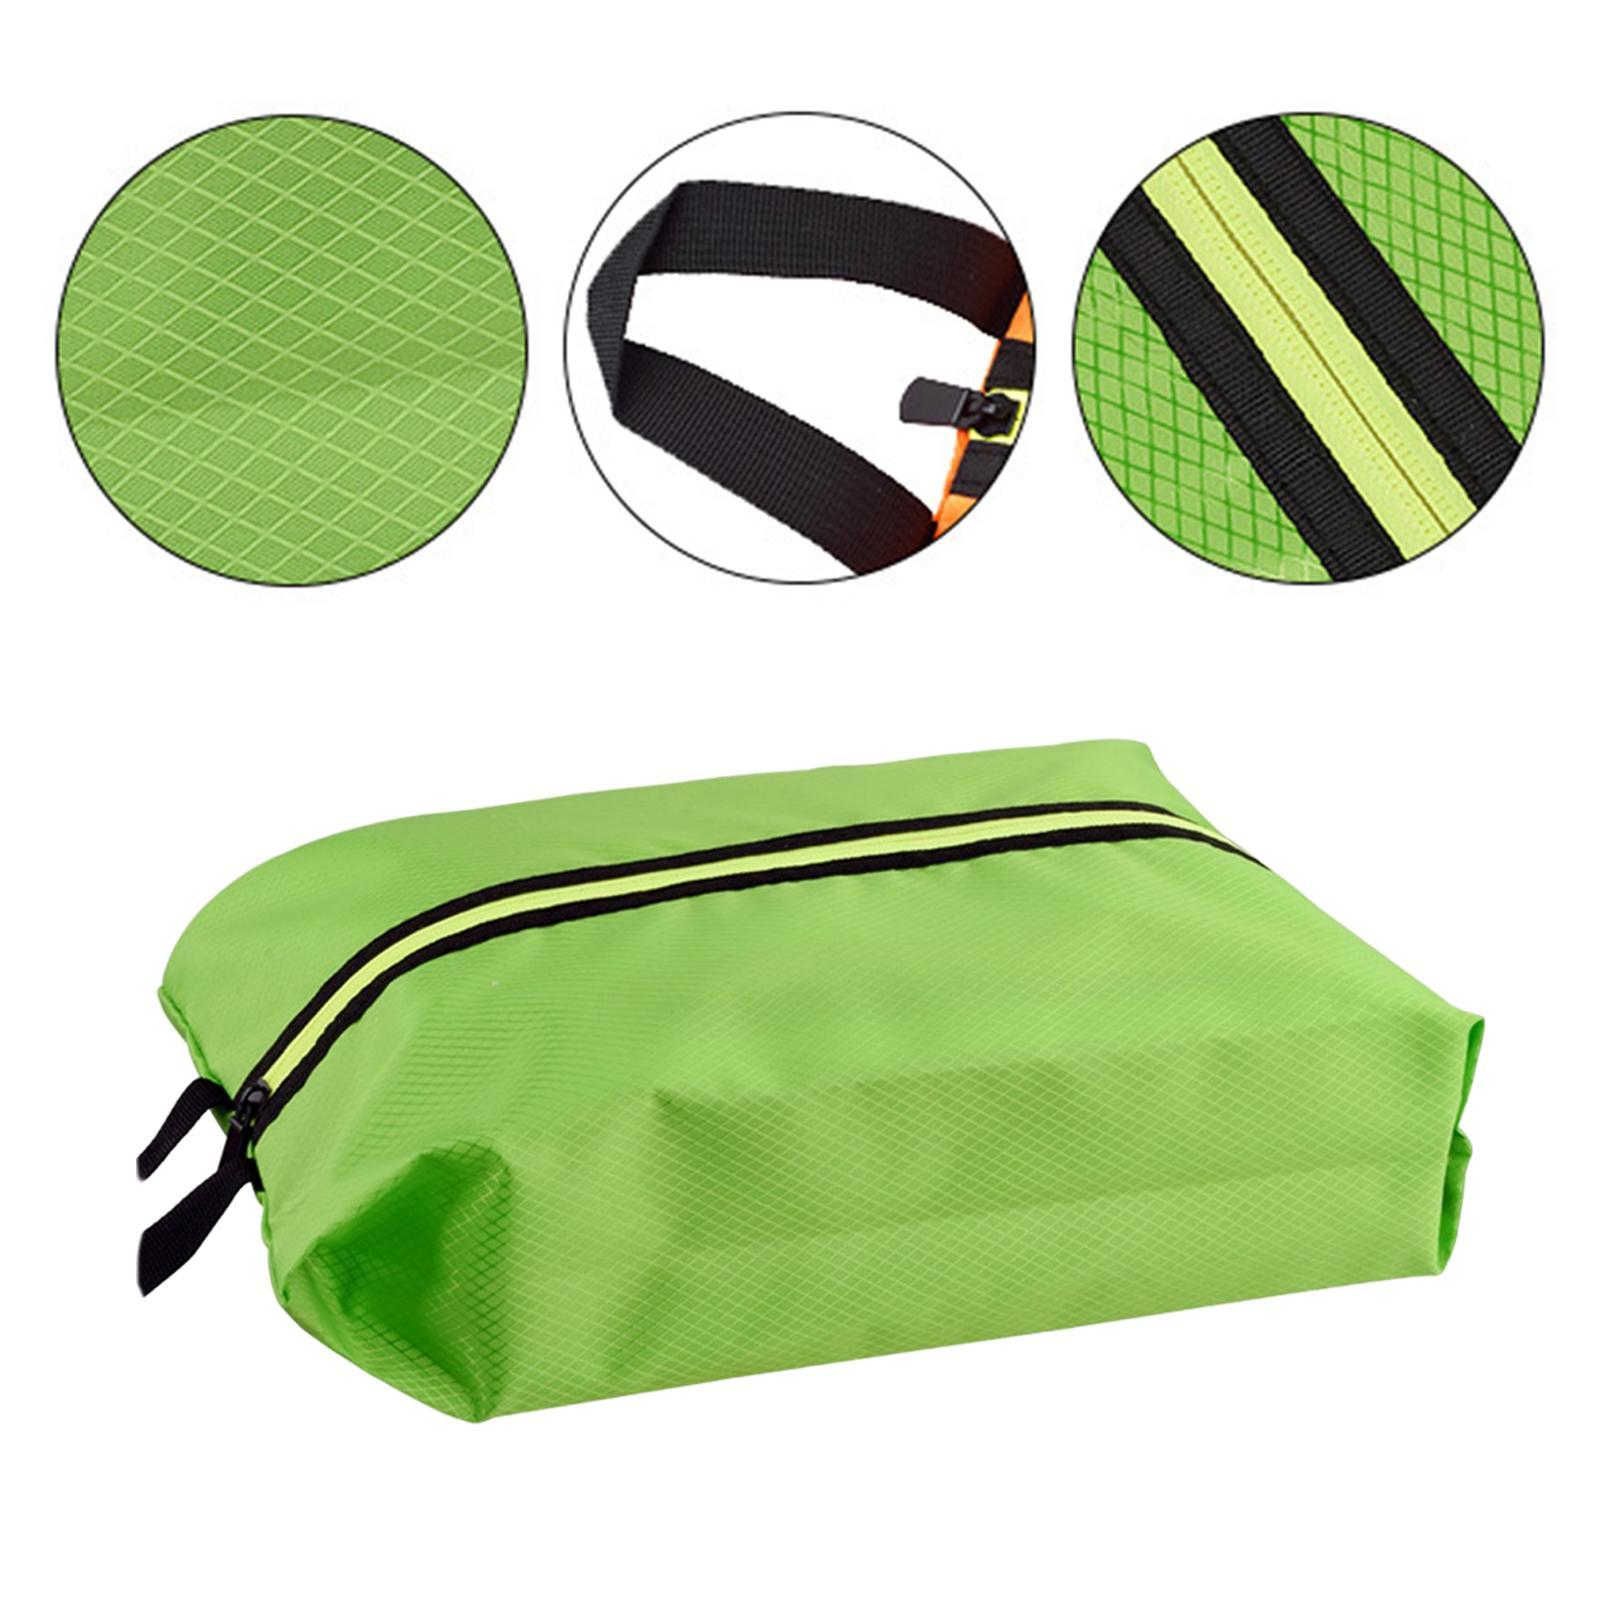 Portable Travel Shoes Storage Bag Foldable Lightweight for Home Travel Gym